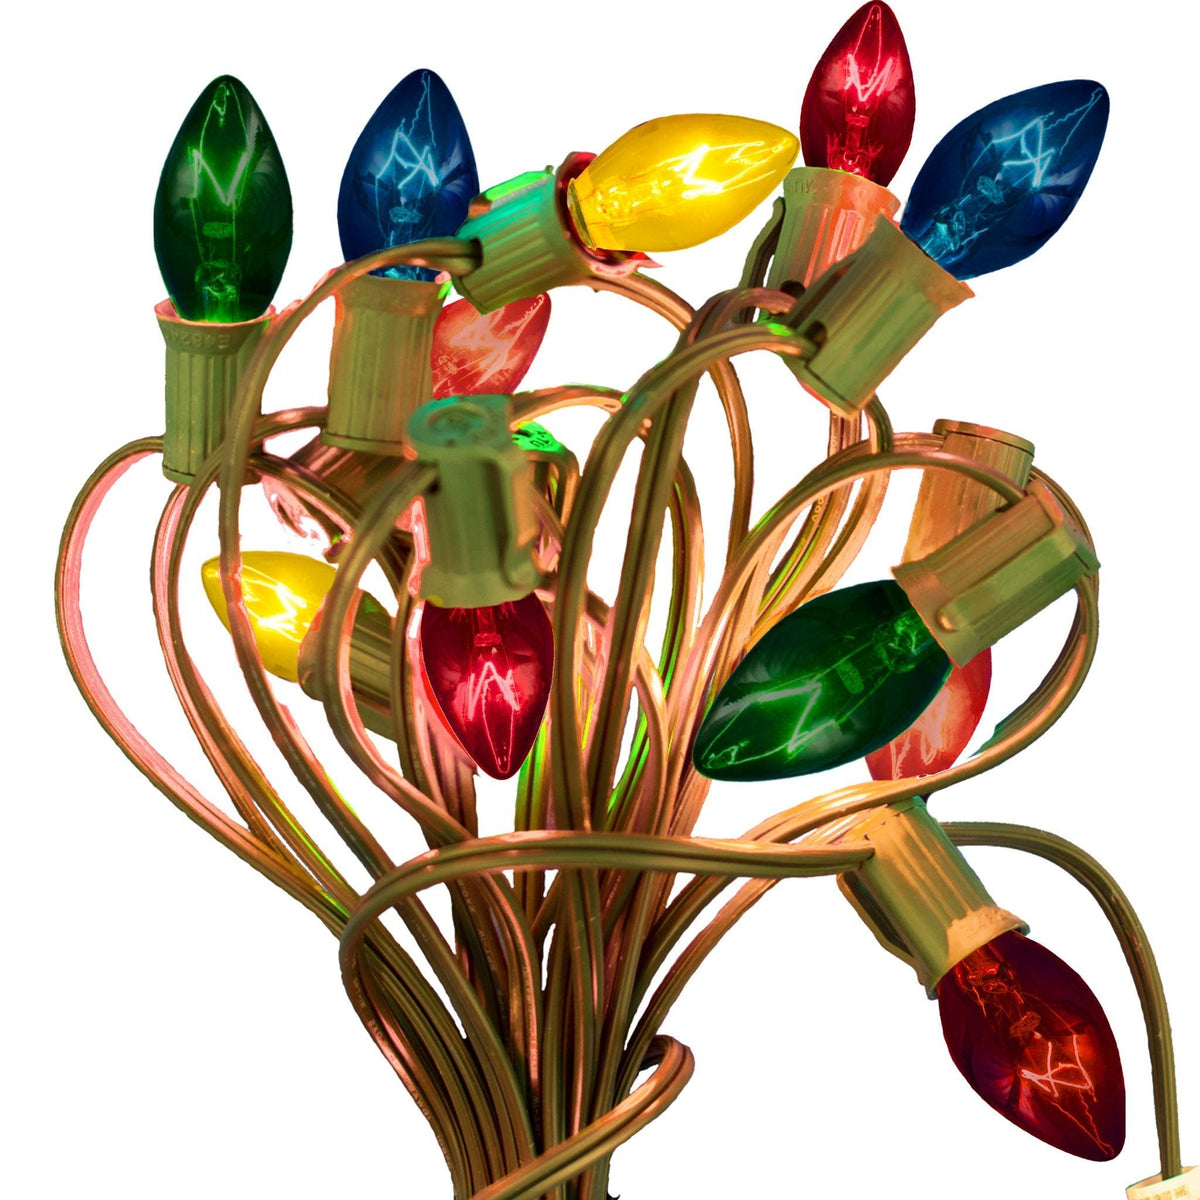 Lee Display offers your favorite Multi-Color Christmas Lights sold with a 25FT Patio String Cord in a set